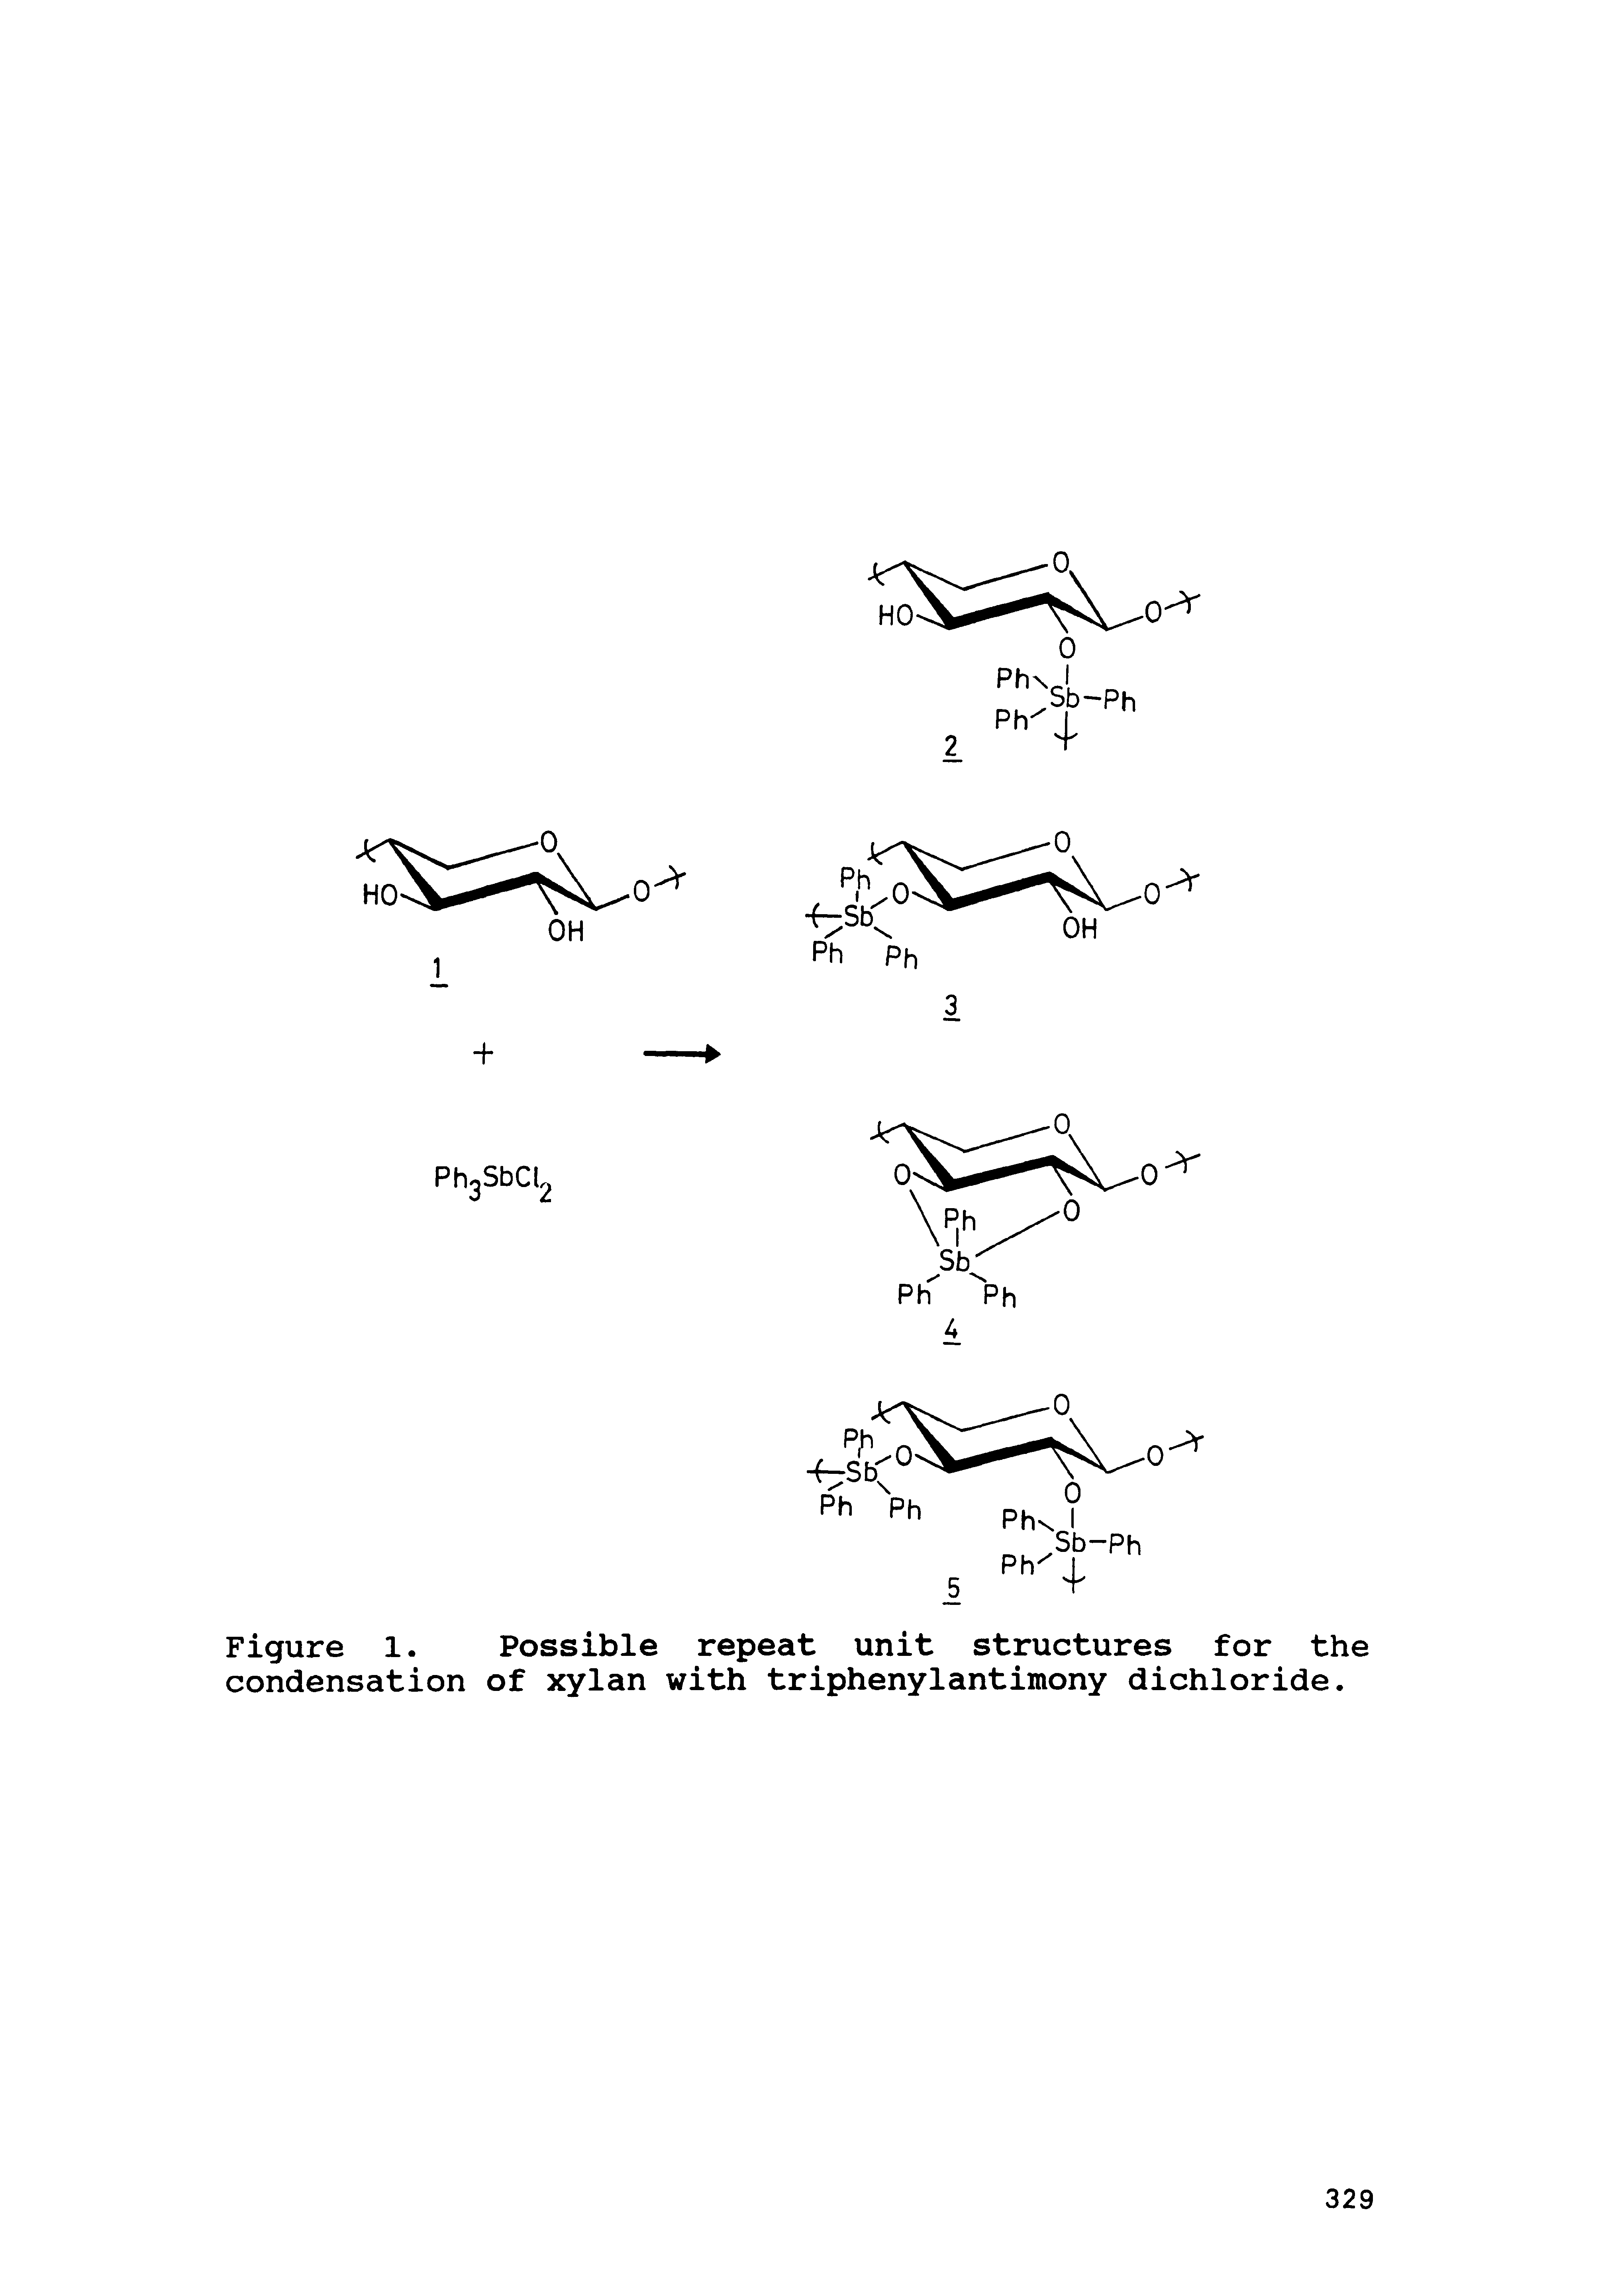 Figure 1. Possible repeat unit structures for the condensation of xylan with triphenylantimony dichloride.